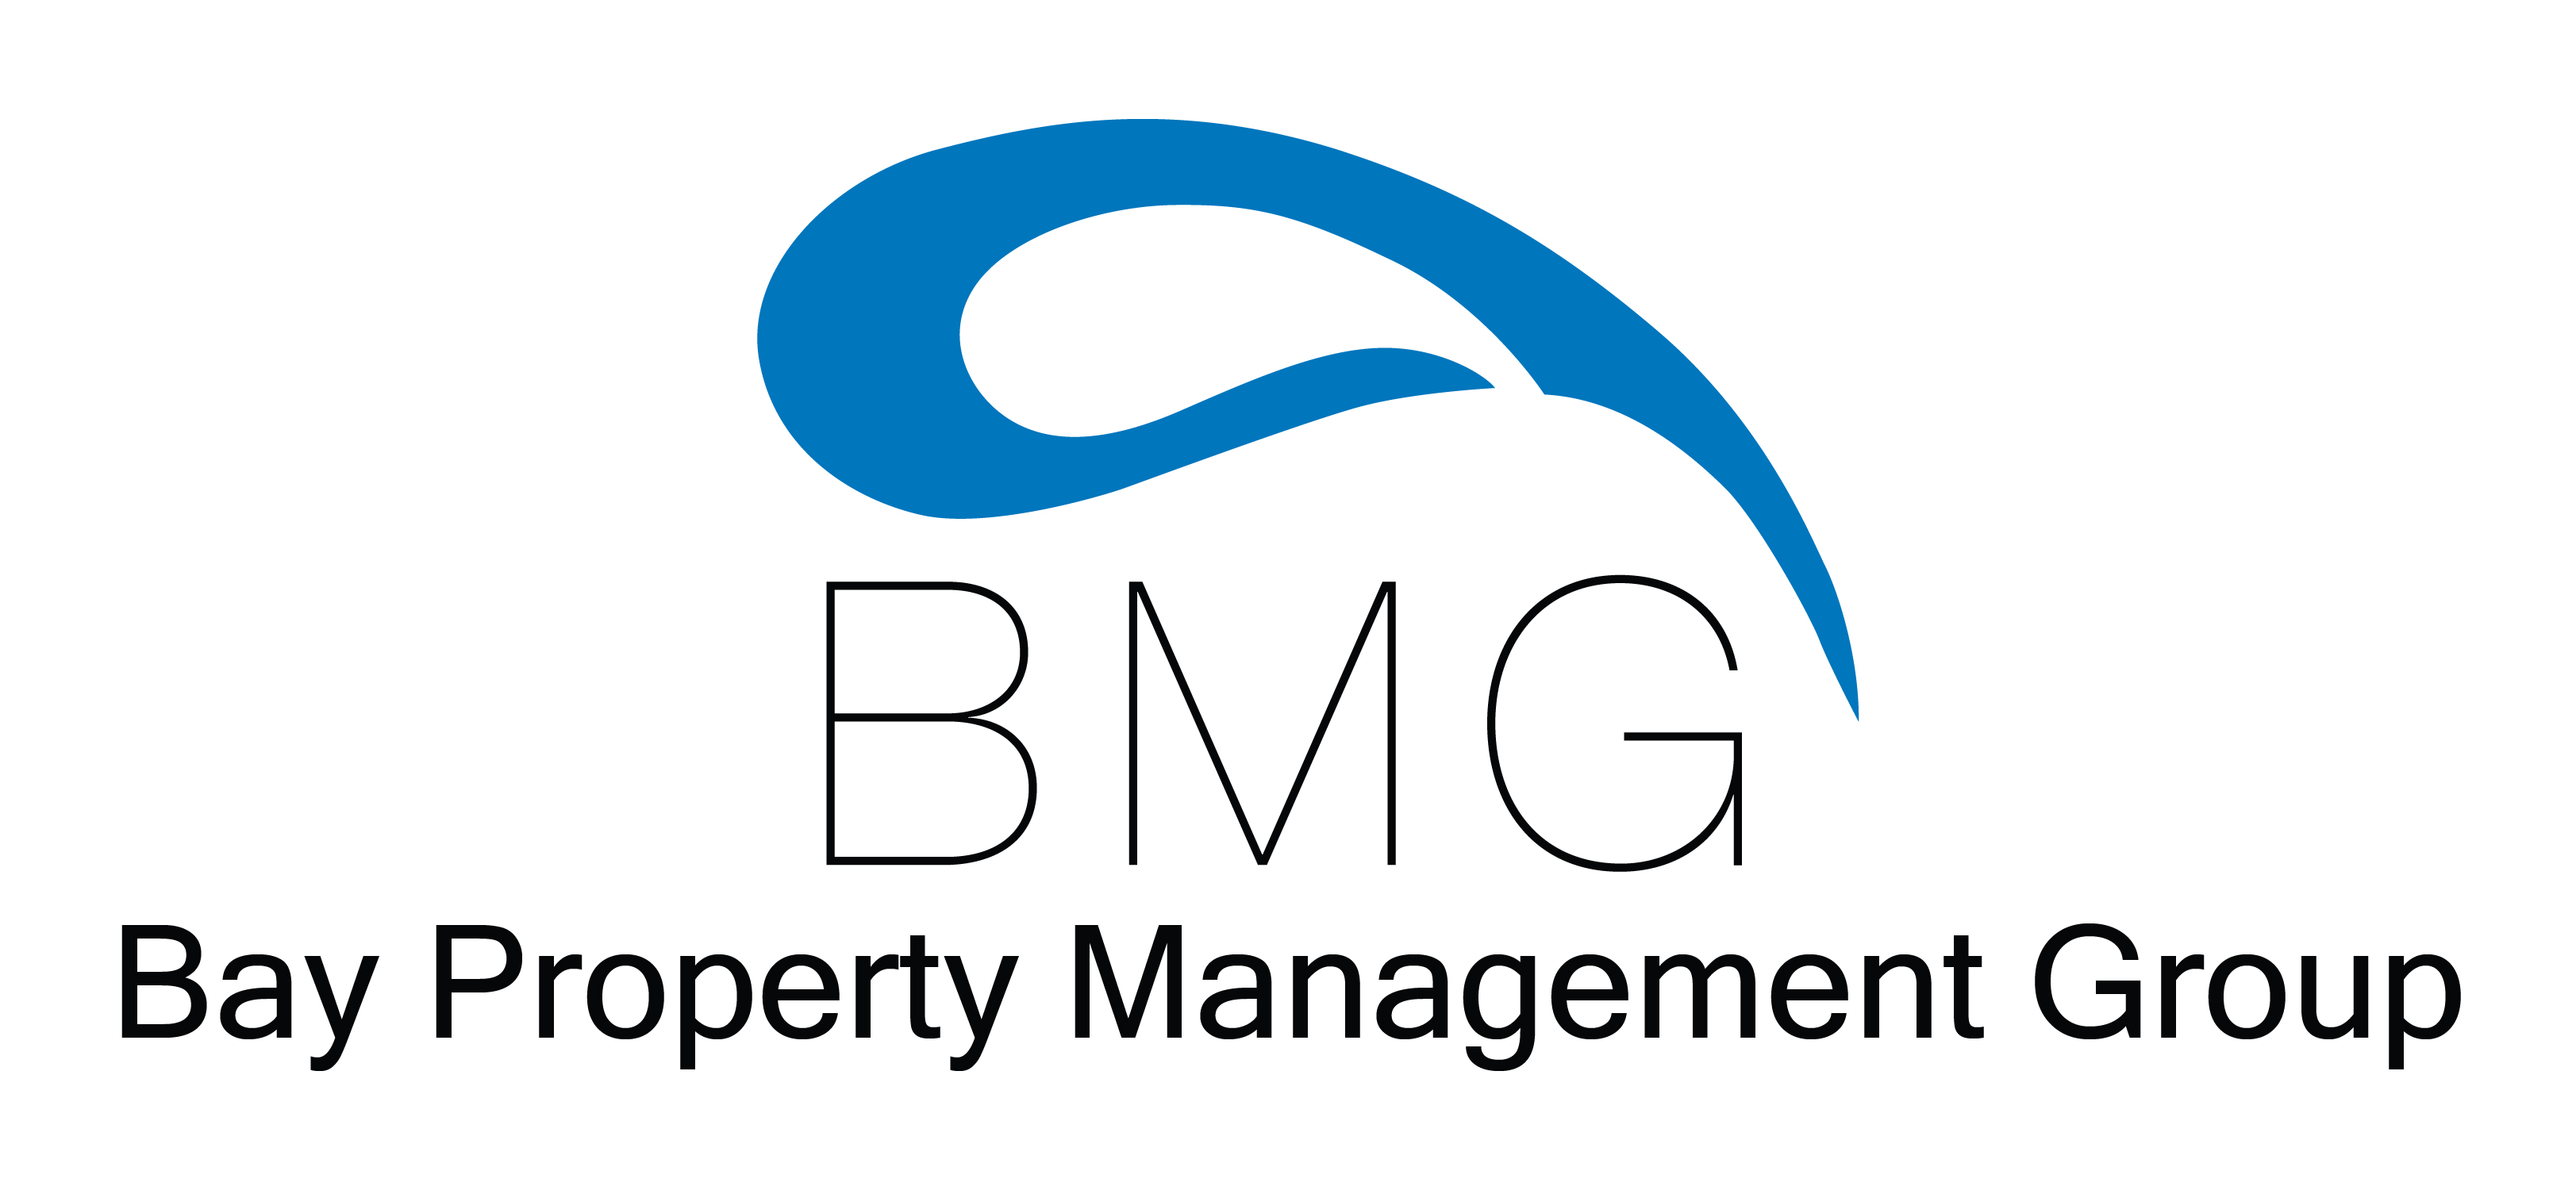 Bay Property Management Group Delaware County | 1254 West Chester Pike #207, Havertown, PA 19083, United States | Phone: (610) 798-6001